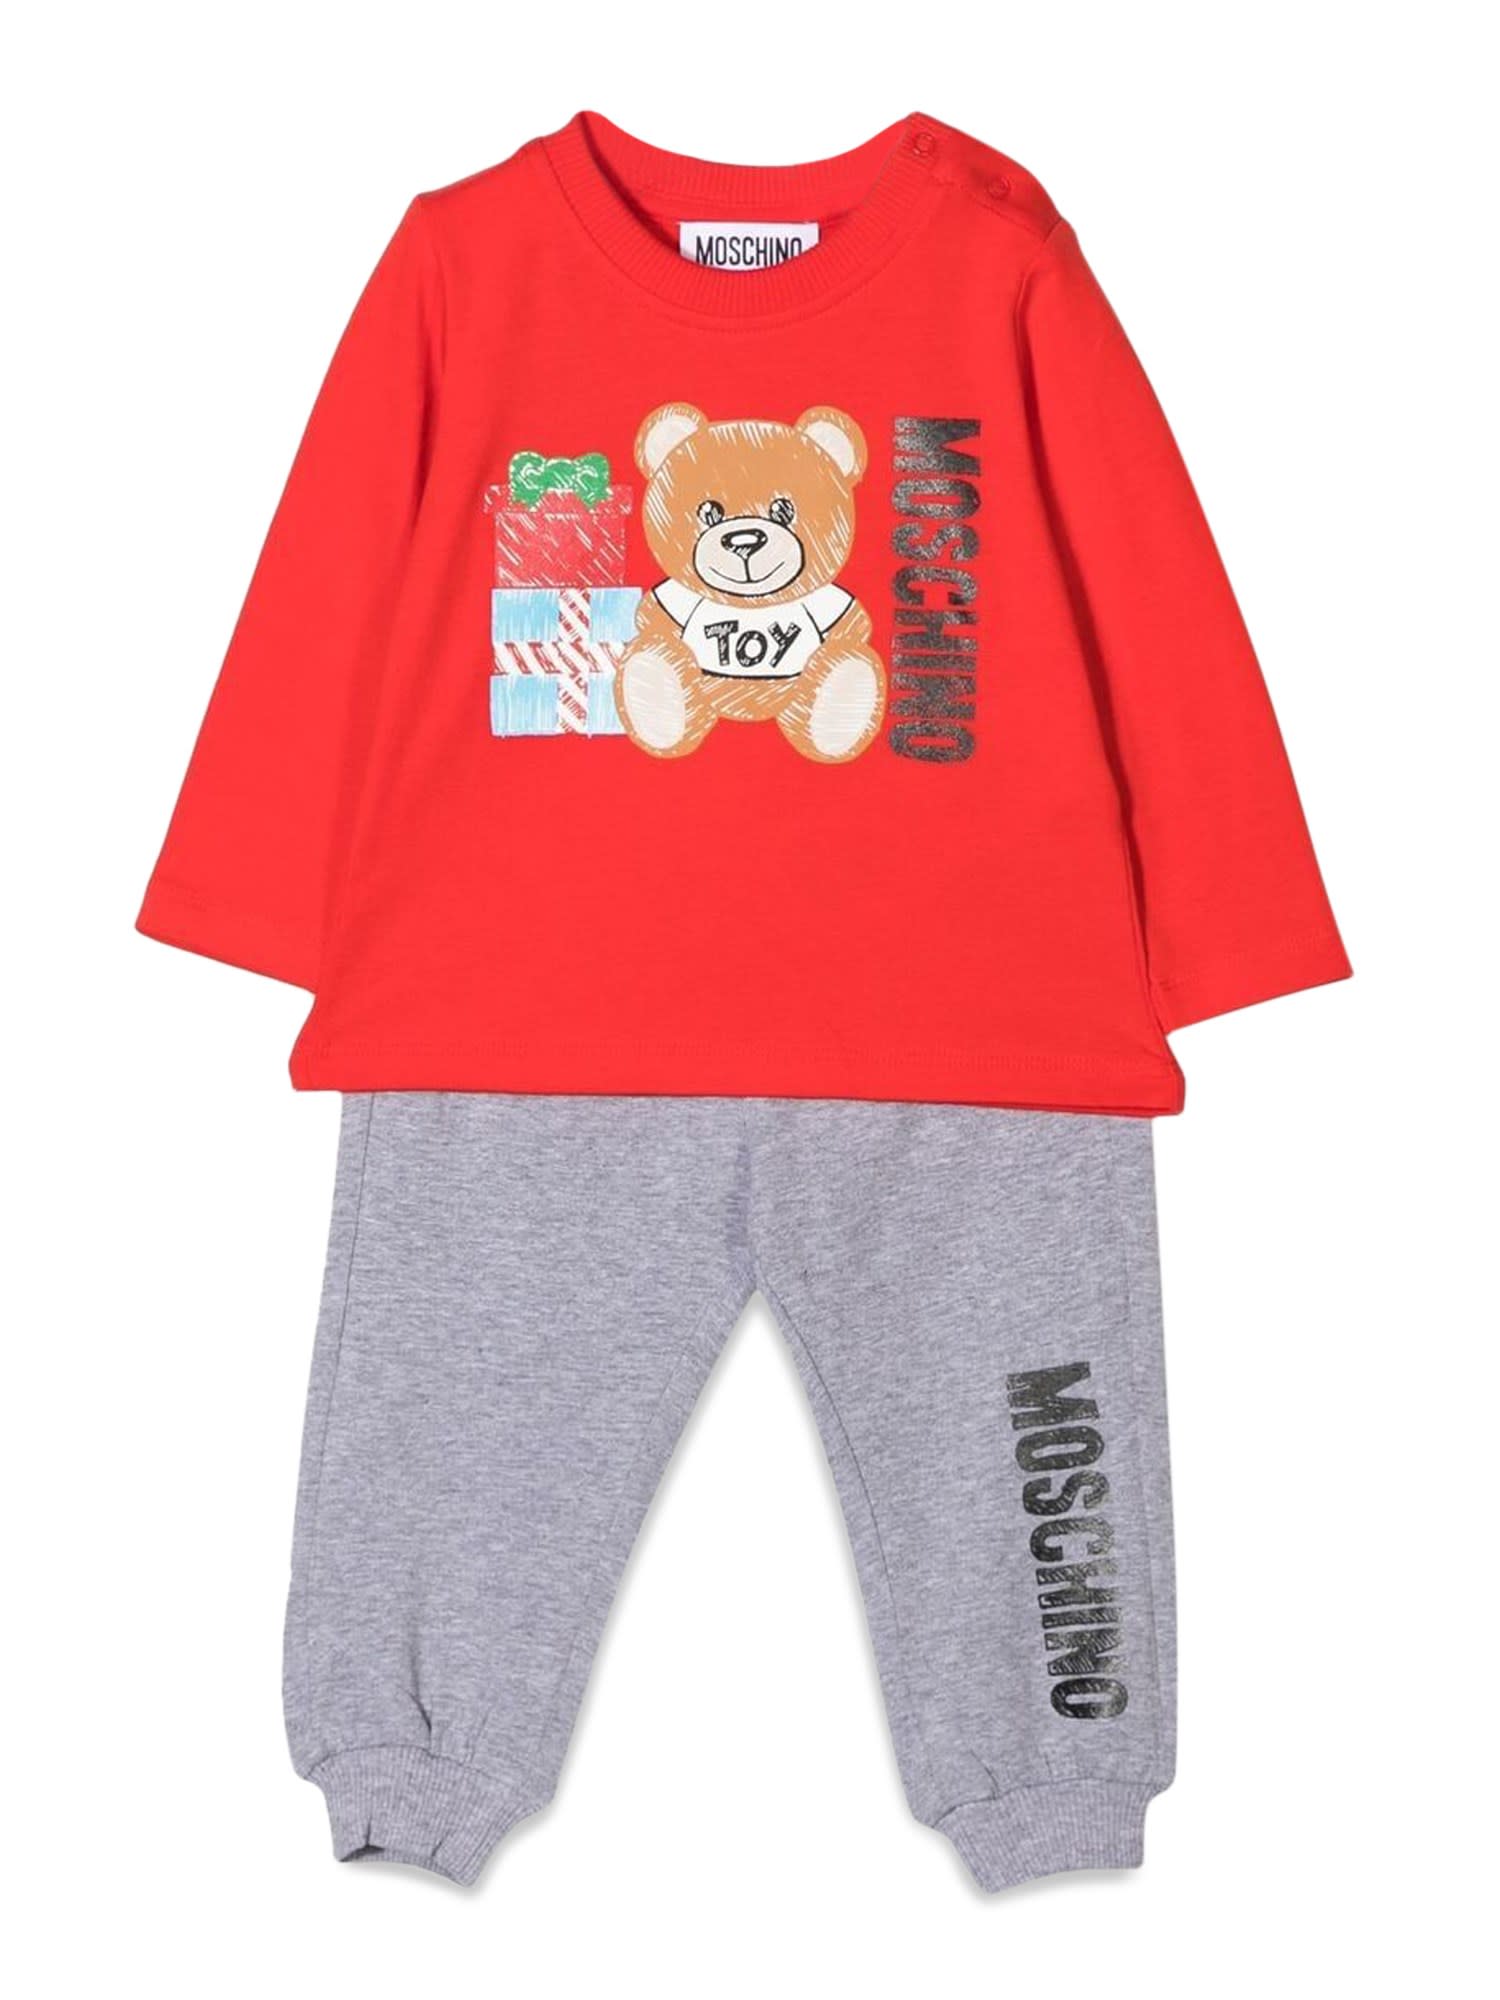 Moschino T-shirt + Pants With Gift Box